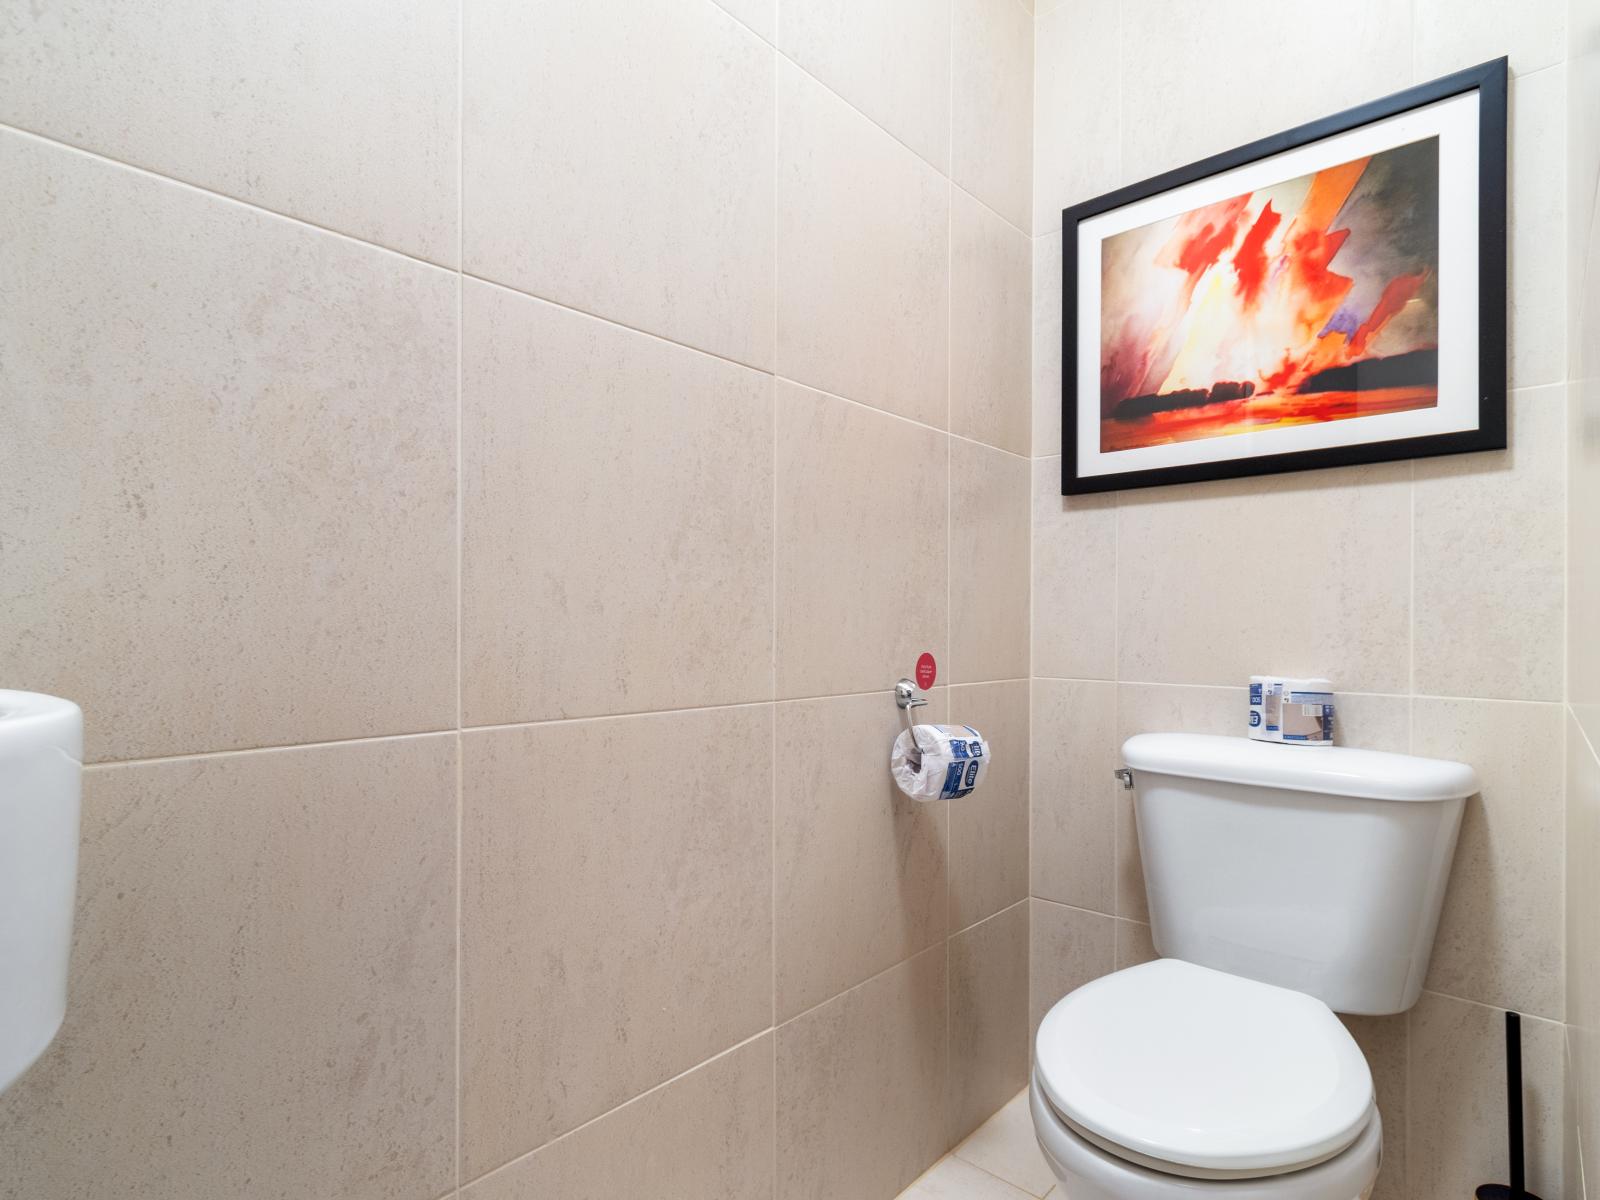 Freshen up in our chic half bathroom, featuring modern amenities and a clean design.